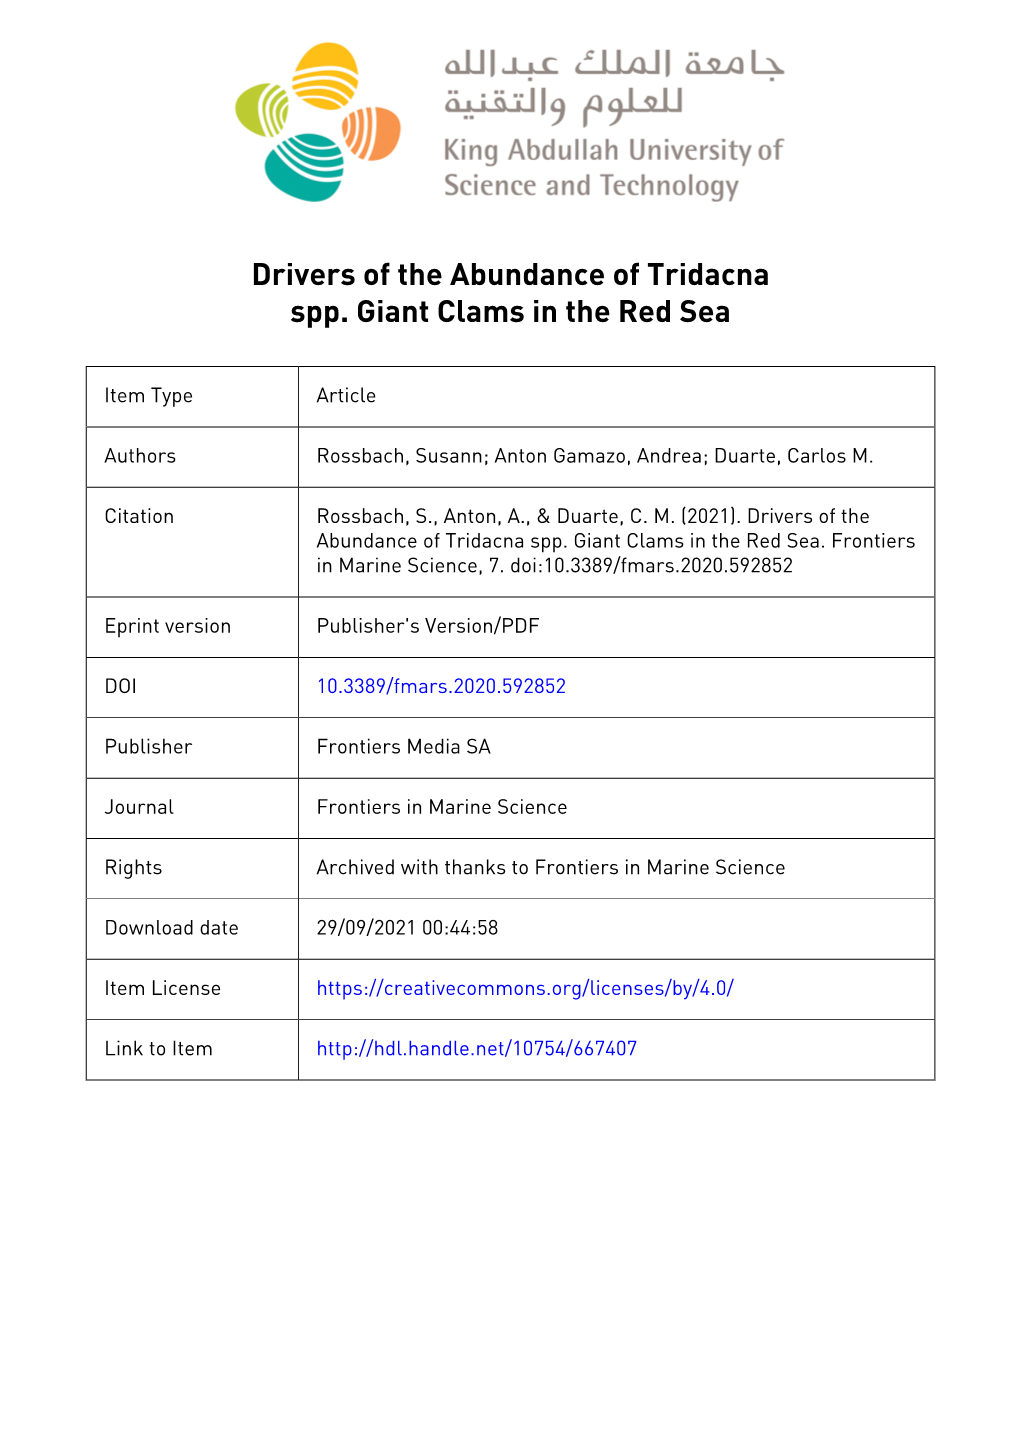 Drivers of the Abundance of Tridacna Spp. Giant Clams in the Red Sea